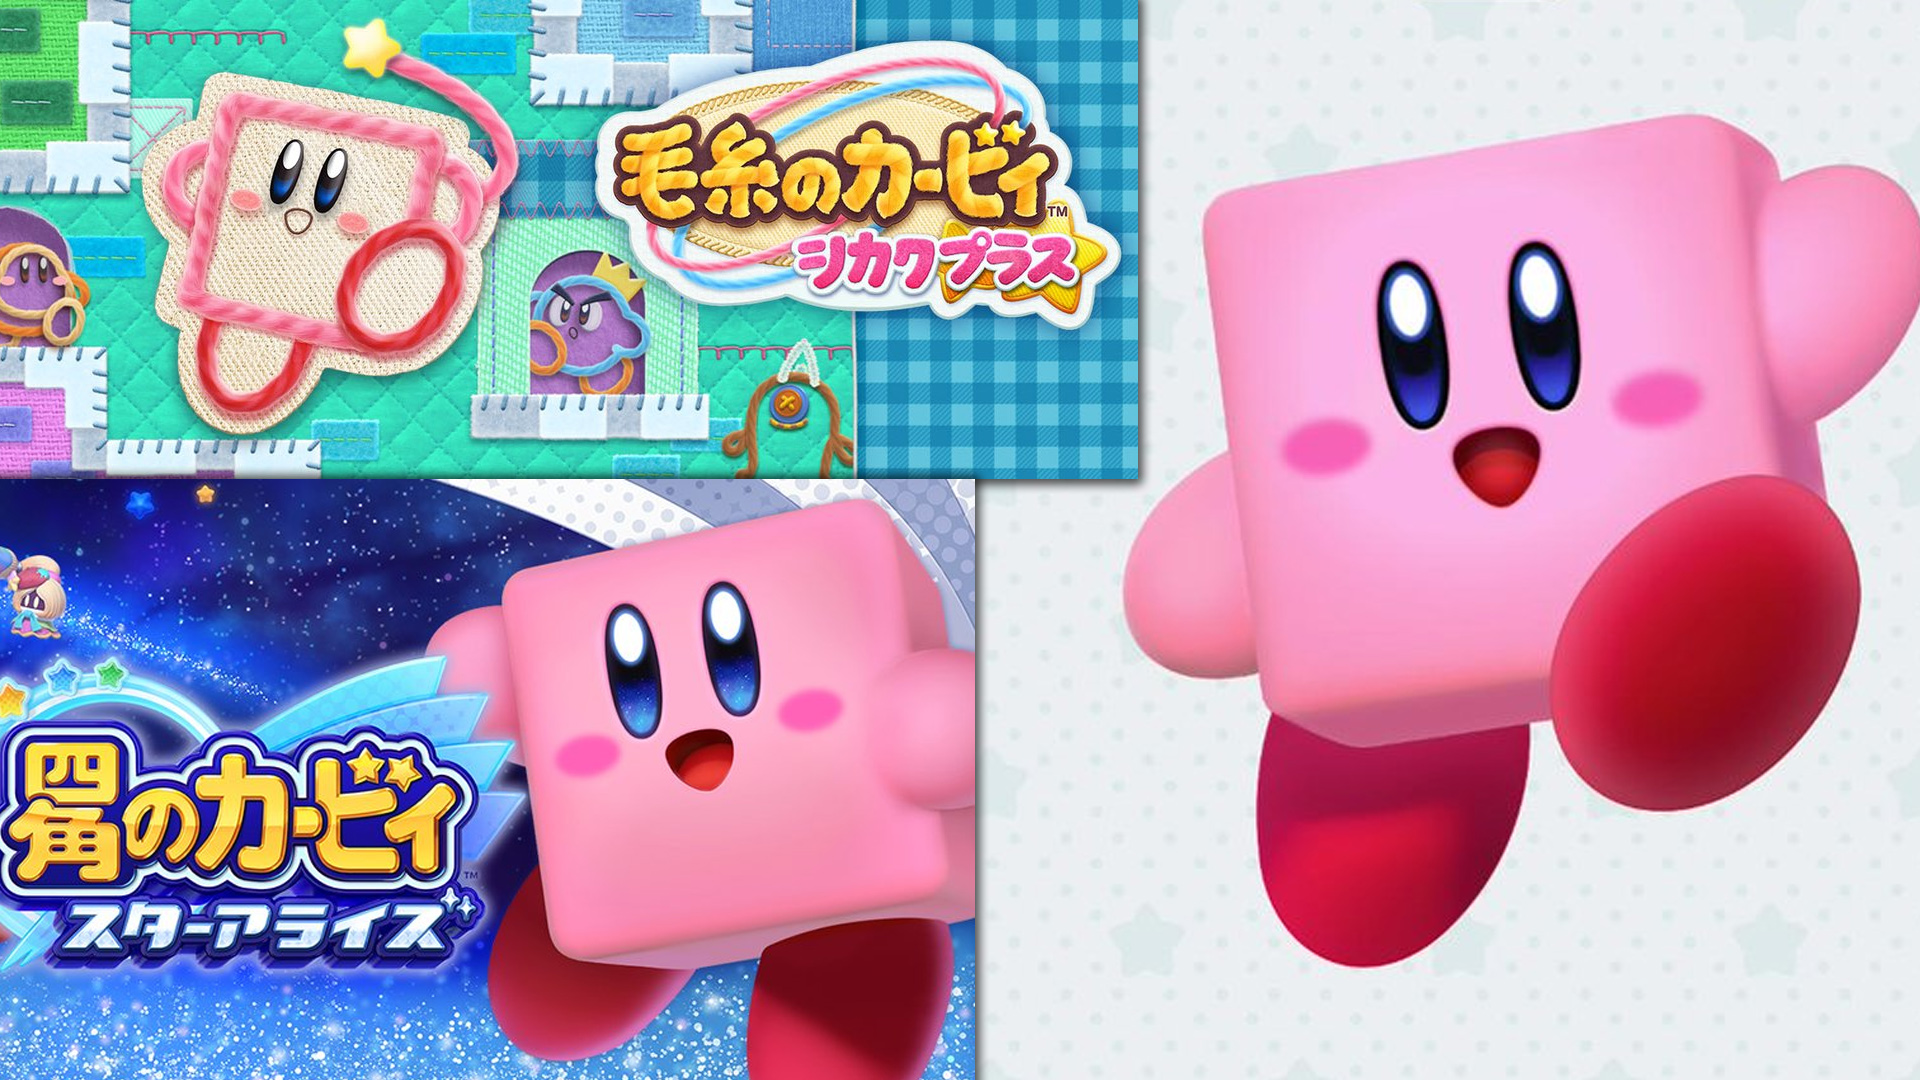 Kirby becomes cuboid for April Fools | Nintendo Wire1920 x 1080